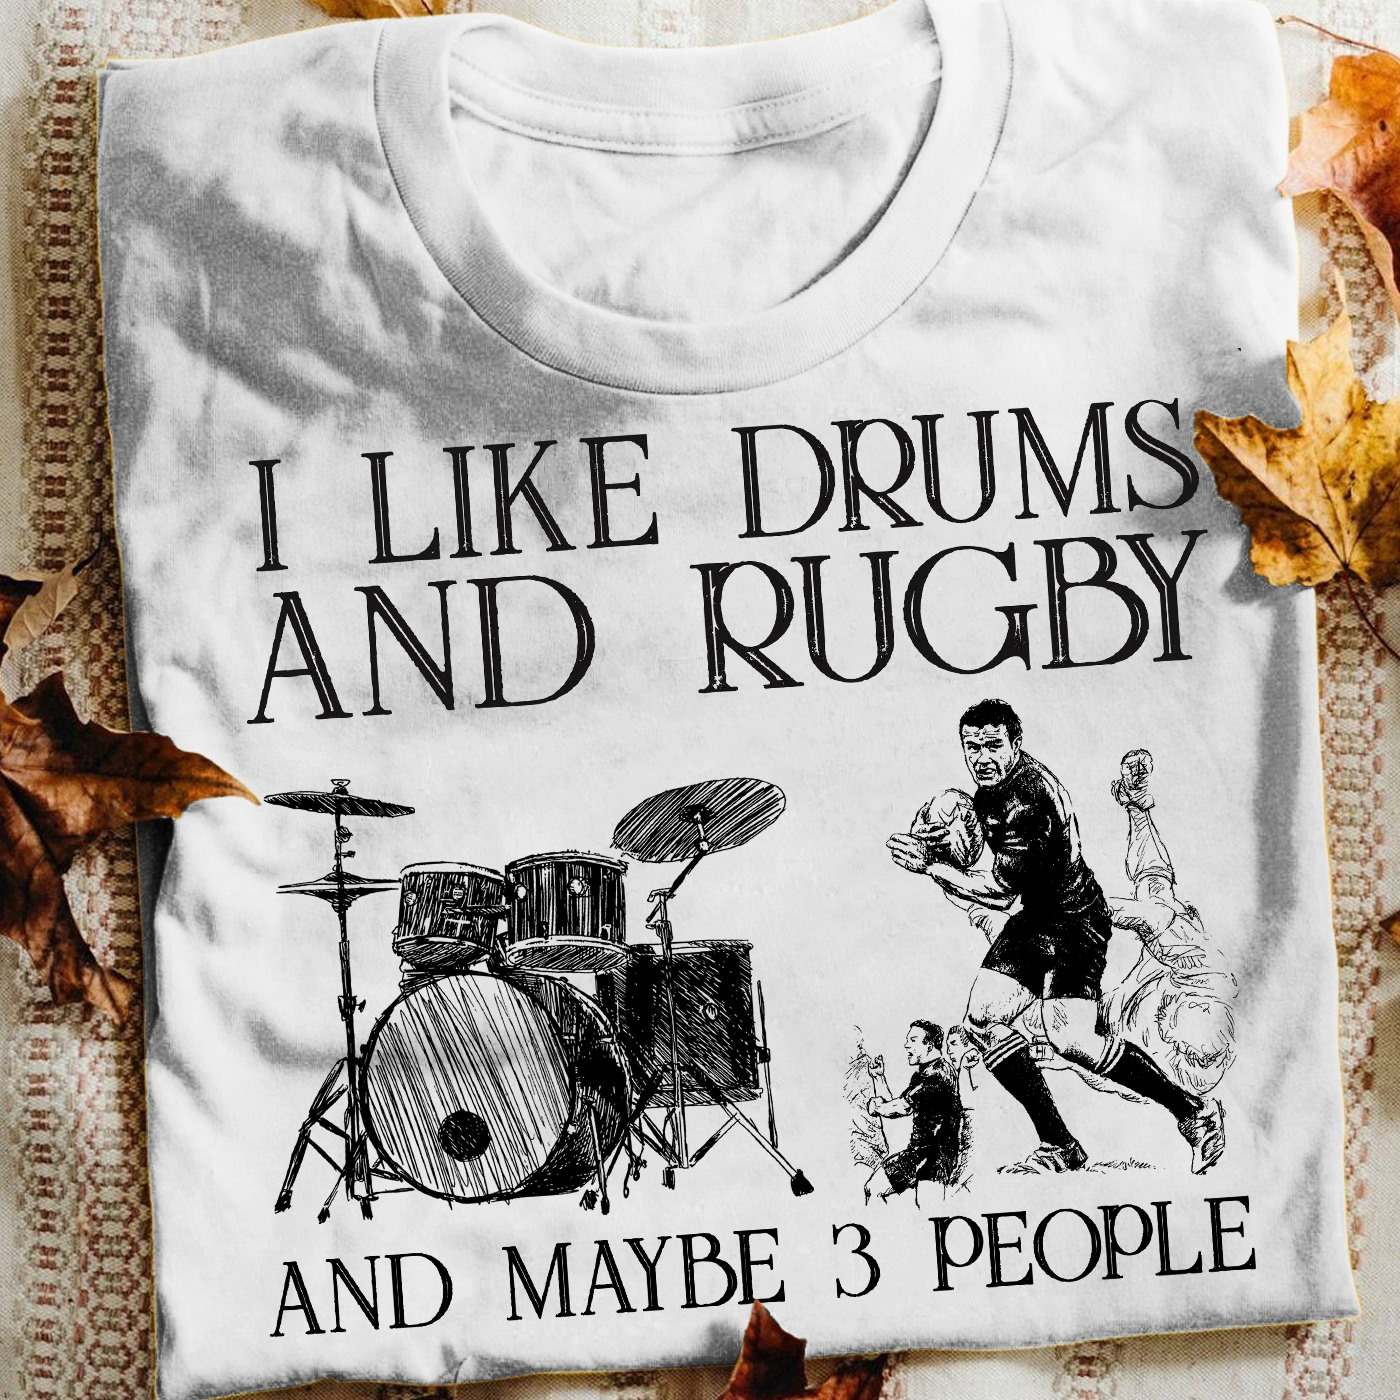 I like drums and rugby and maybe 3 people - Rugby football